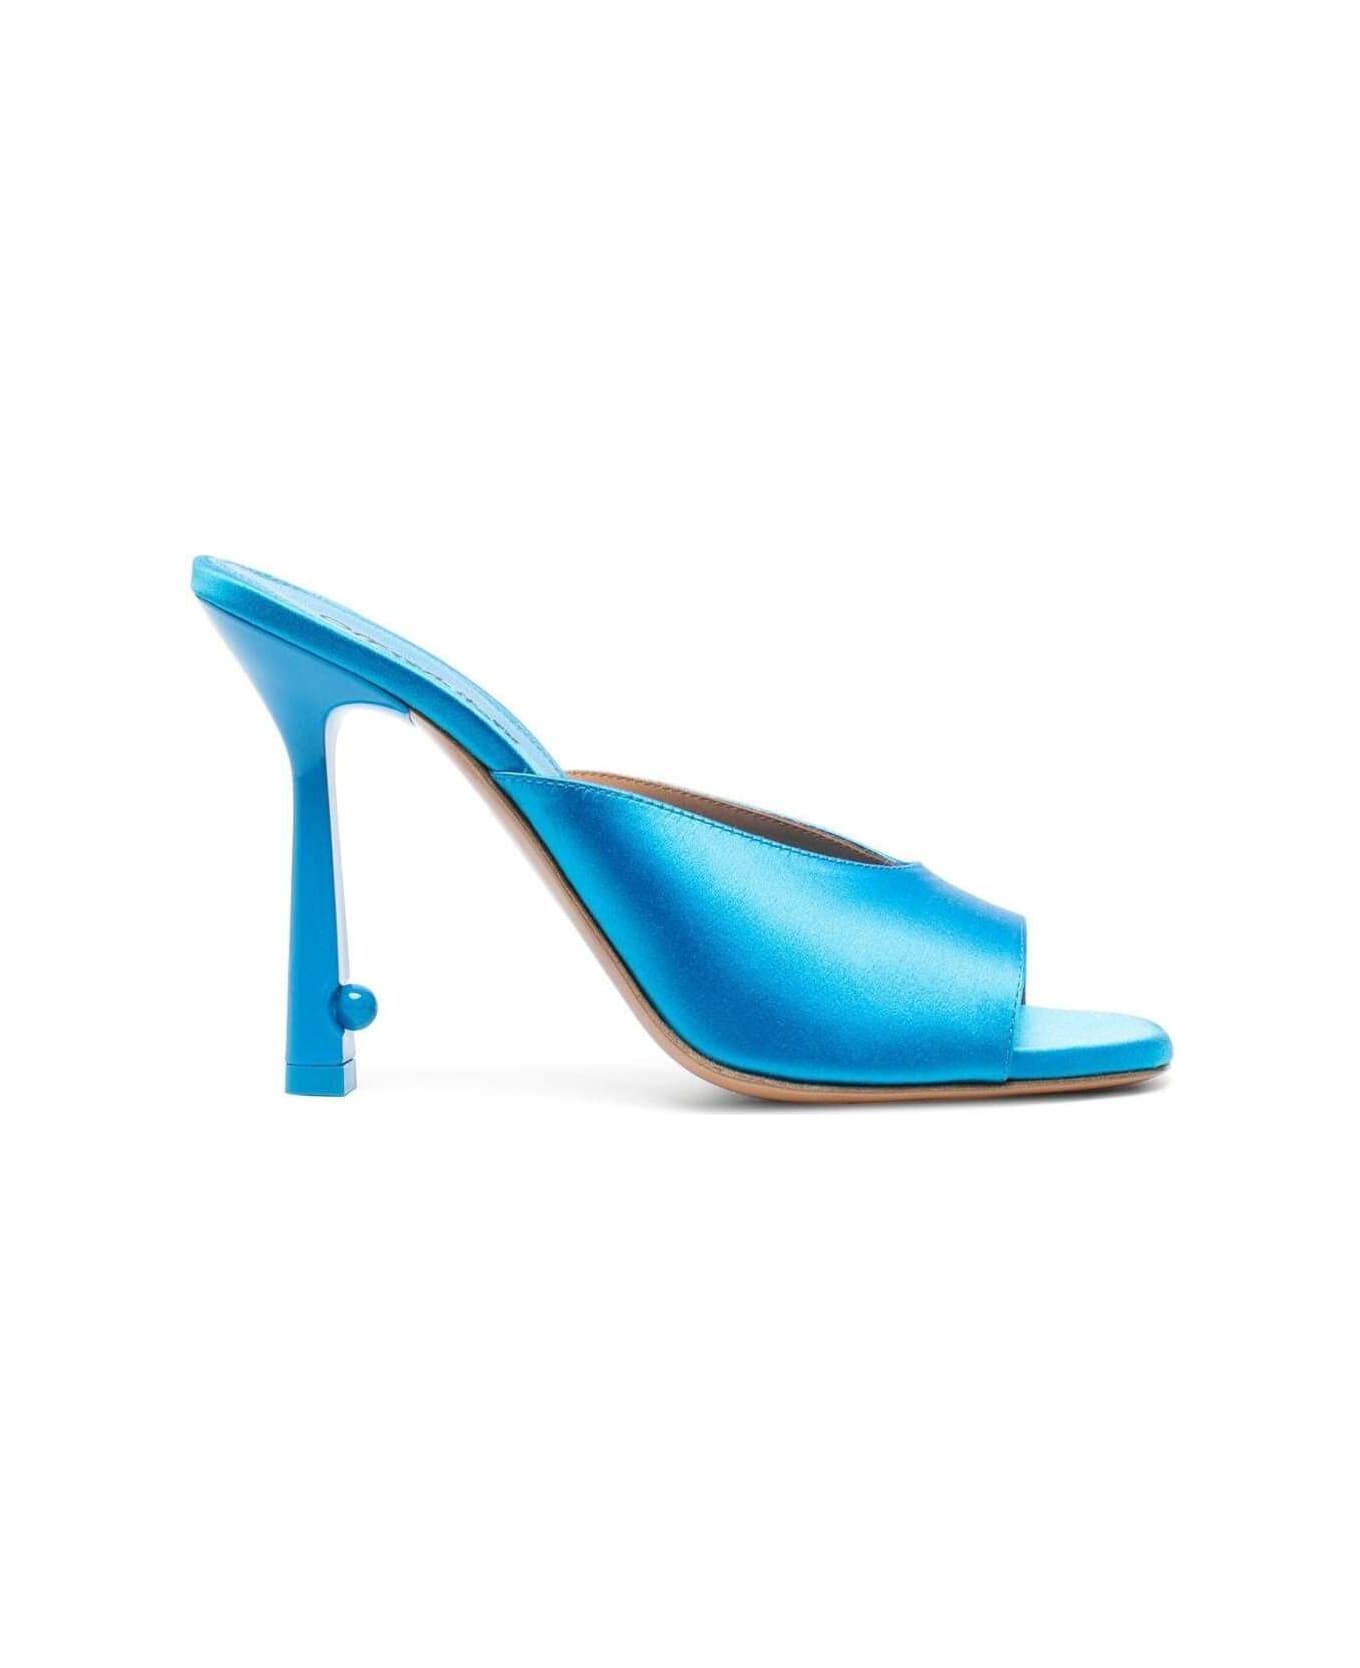 Off-White Pop Lollipop Pointed-toe Mules In Light-.blue Leather Woman - Light blue